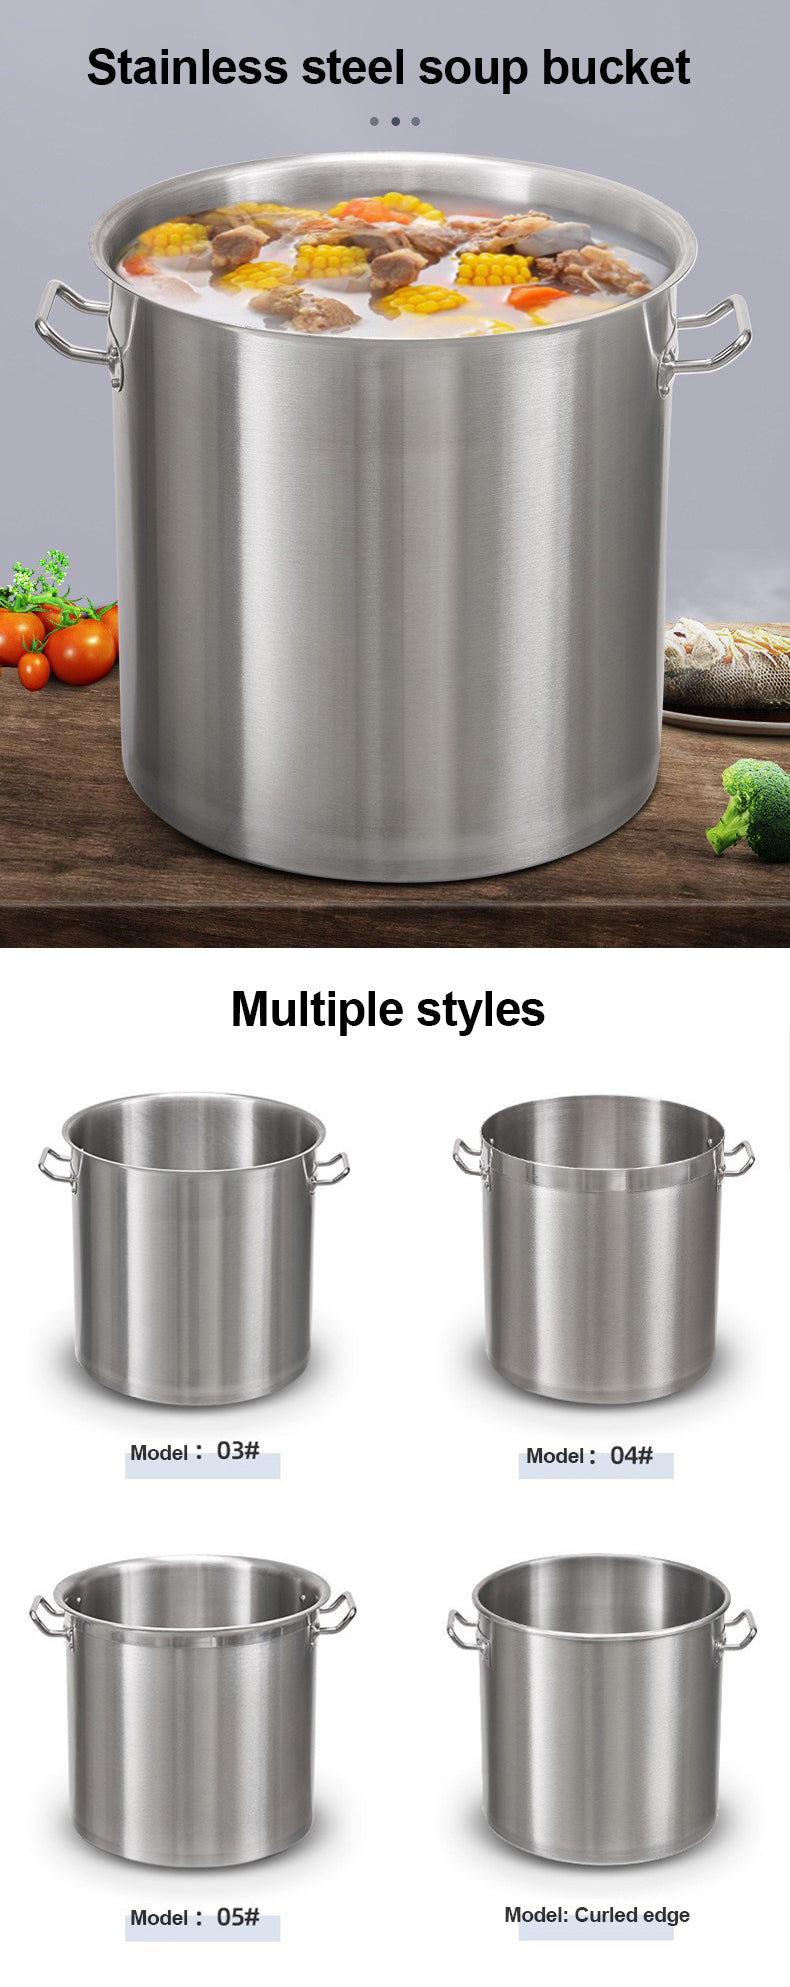 304 stainless steel double bottom soup bucket - ST00157